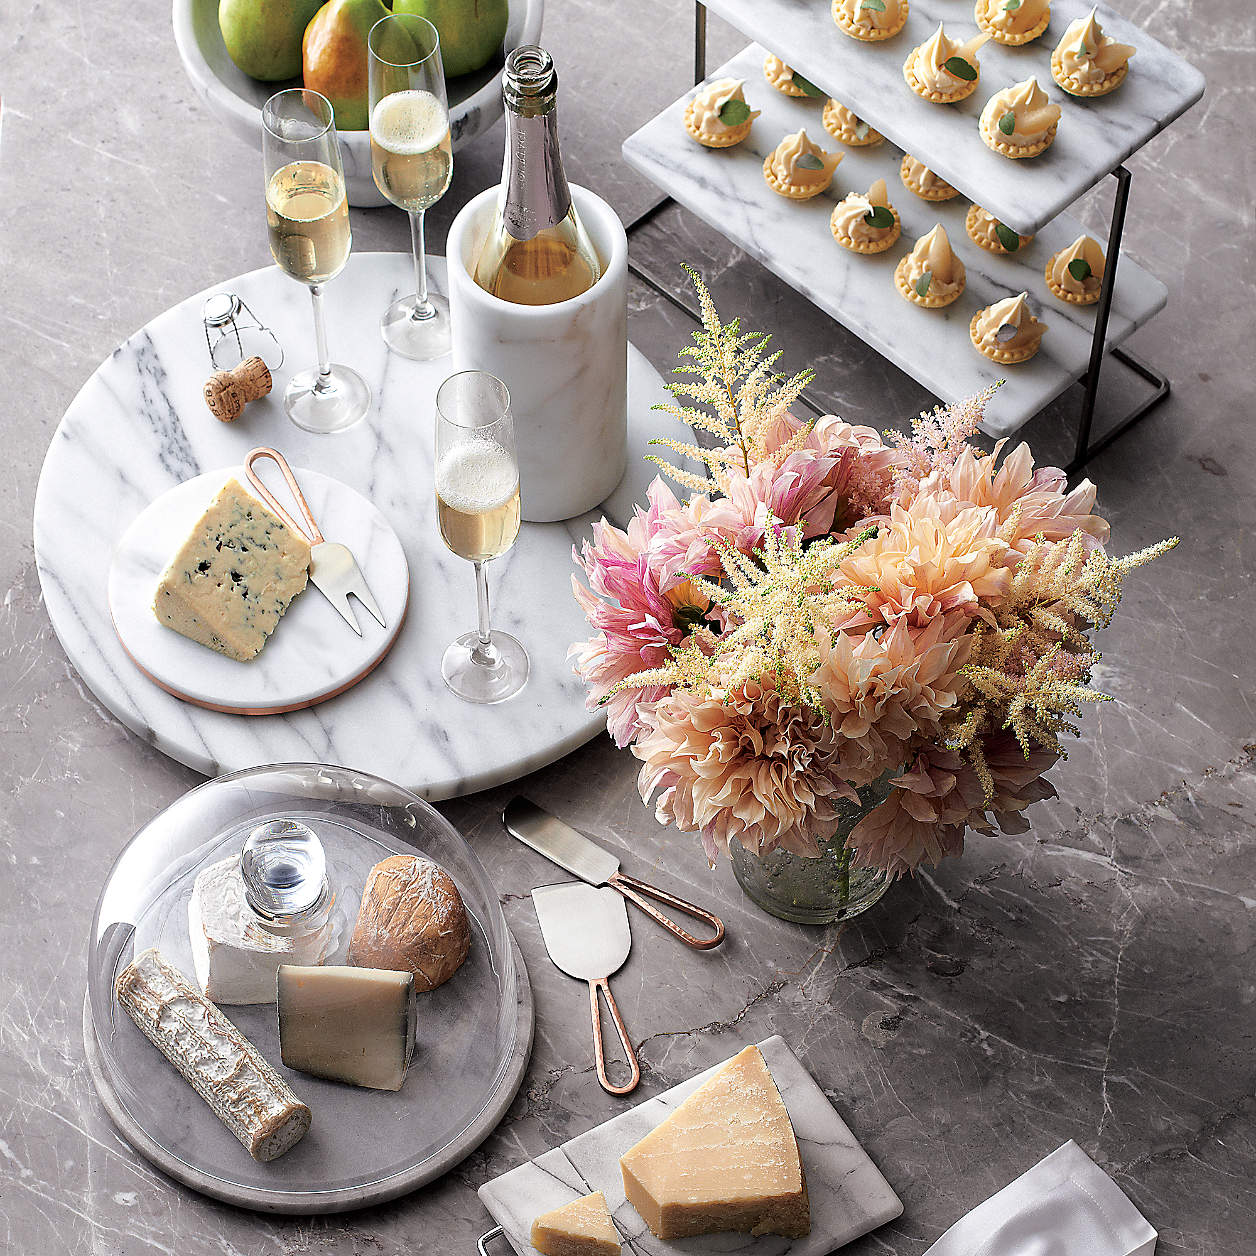 Wine chiller placed amount champagne glasses, cheeses, puff pastry and fresh cut flowers